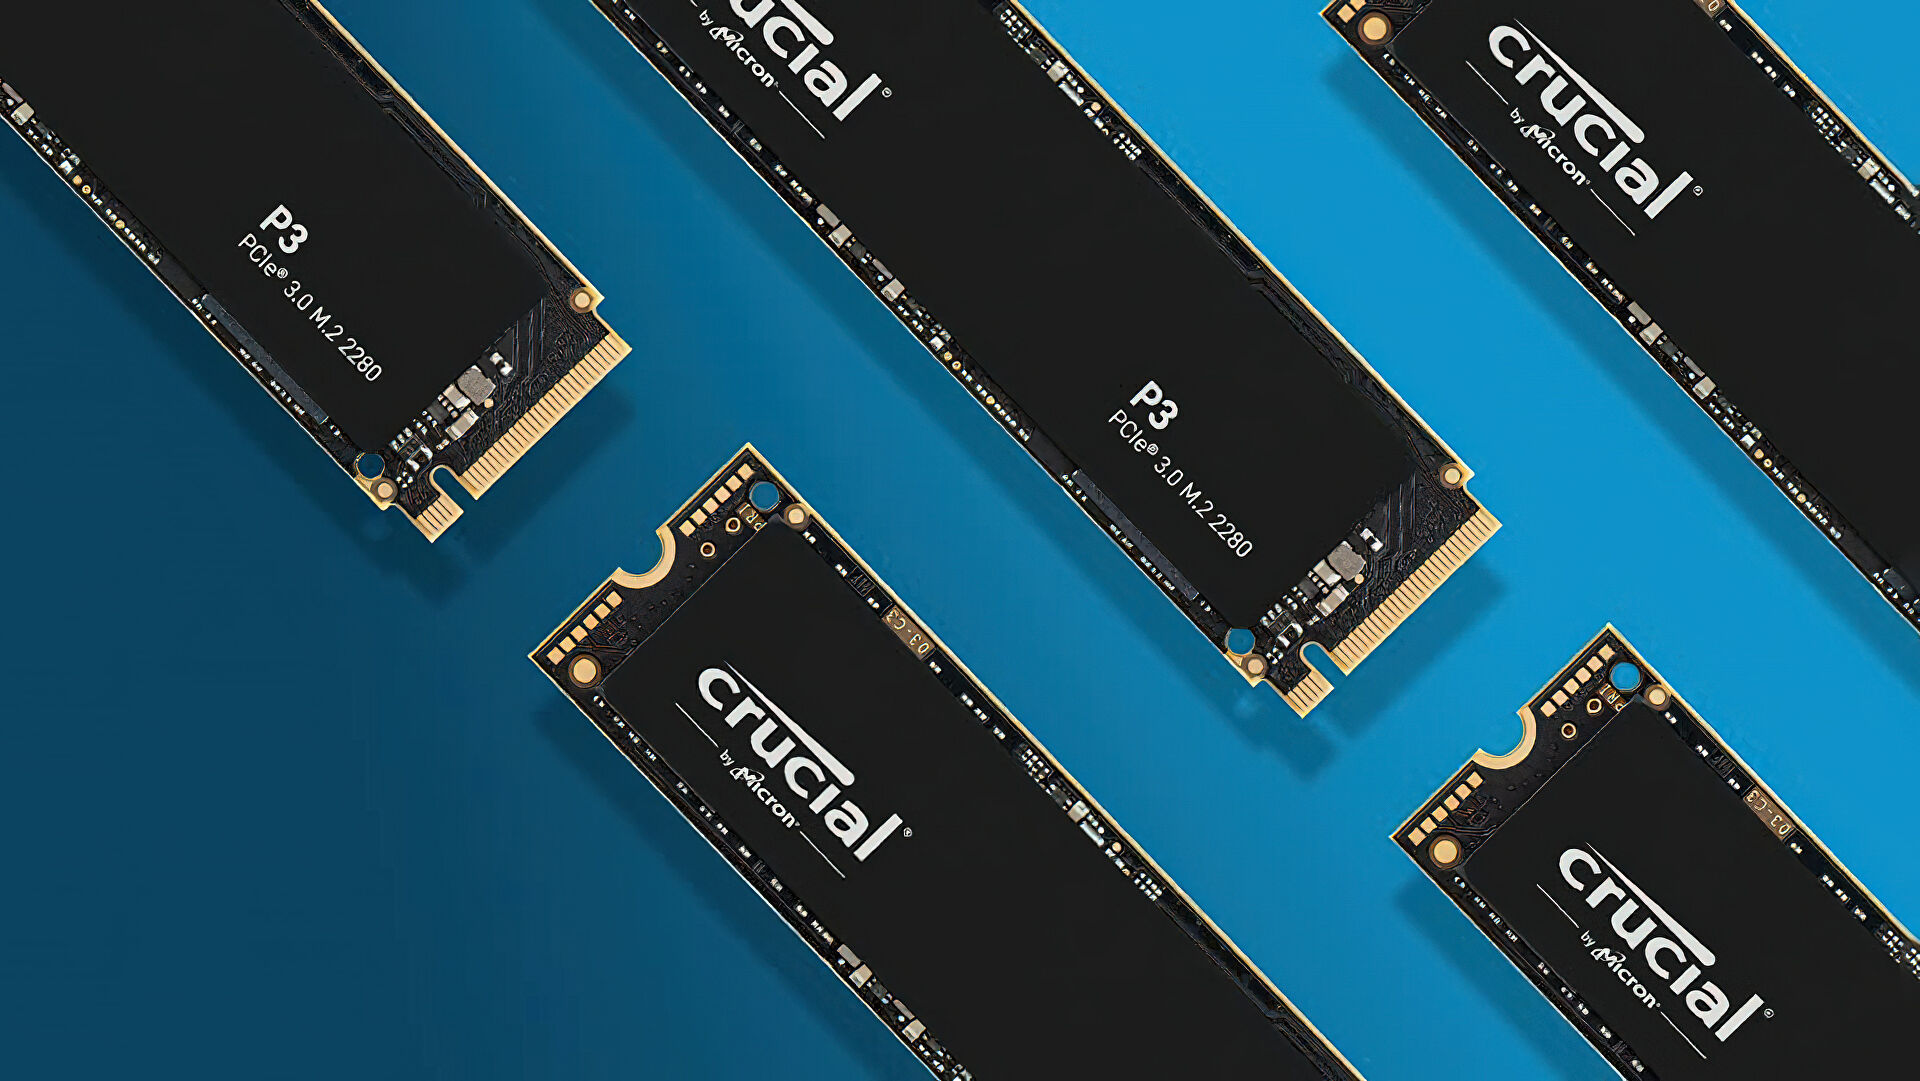 Crucial's P3 NVMe SSD is down to £105 for a 2TB unit